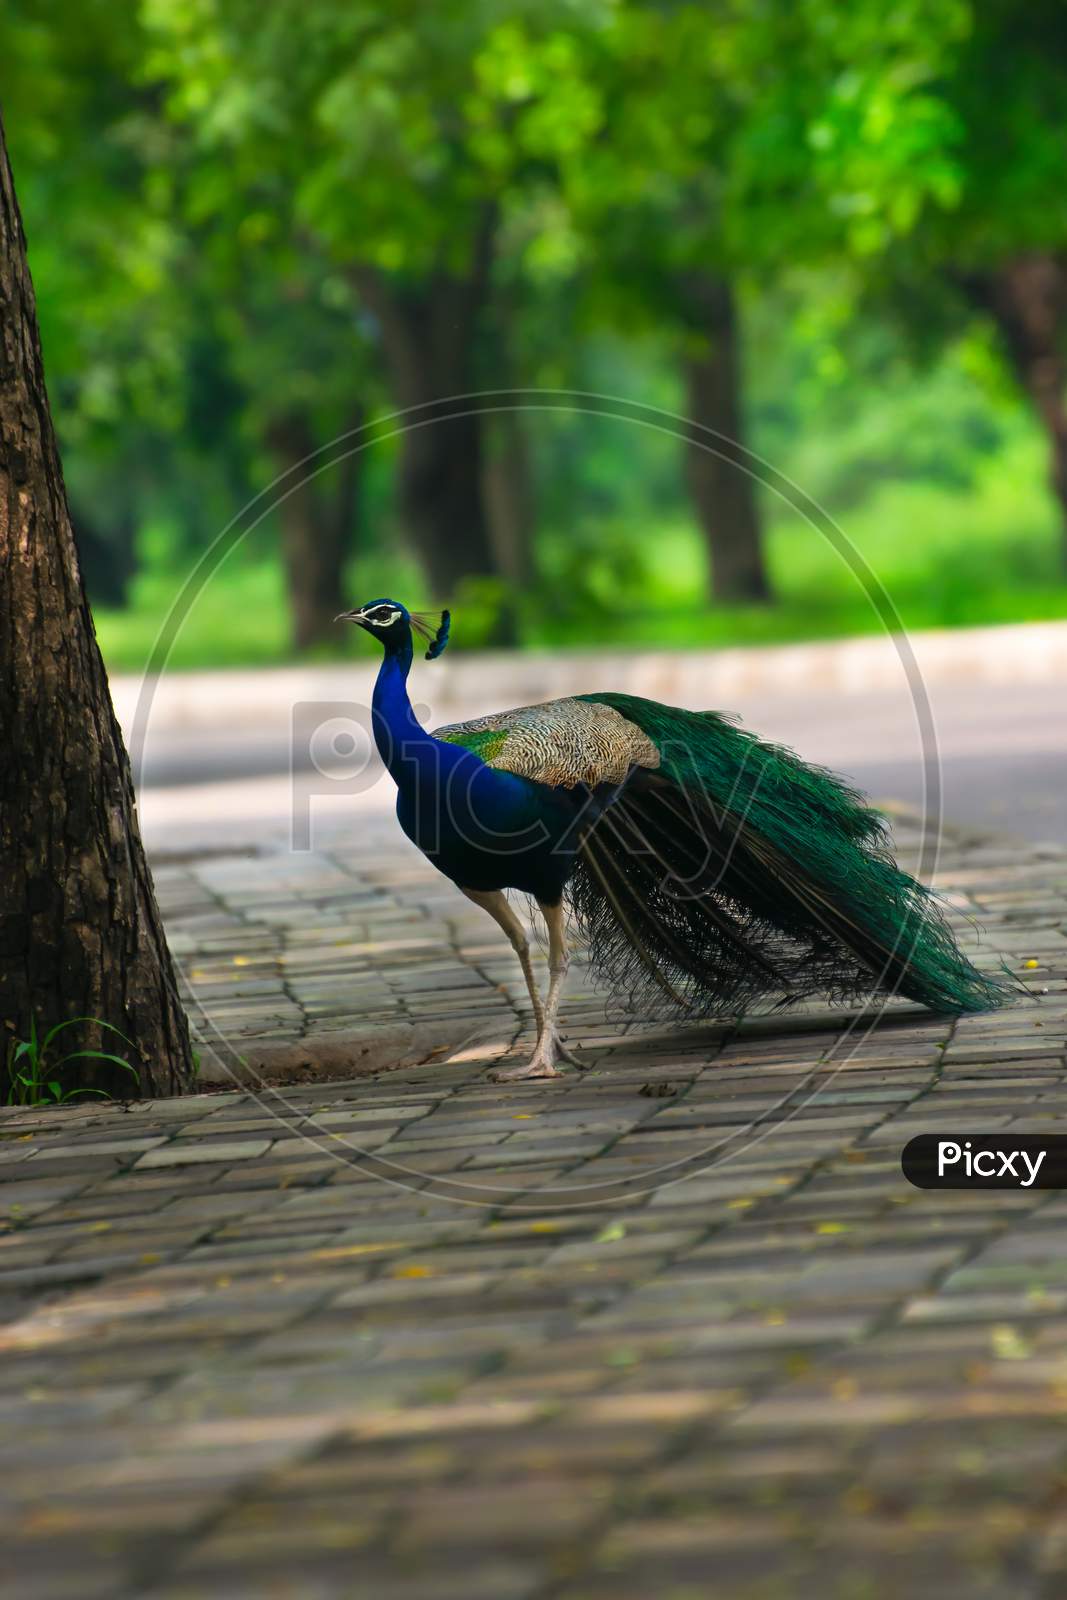 A Beautiful Indian Male Peacock Walking Down The Street